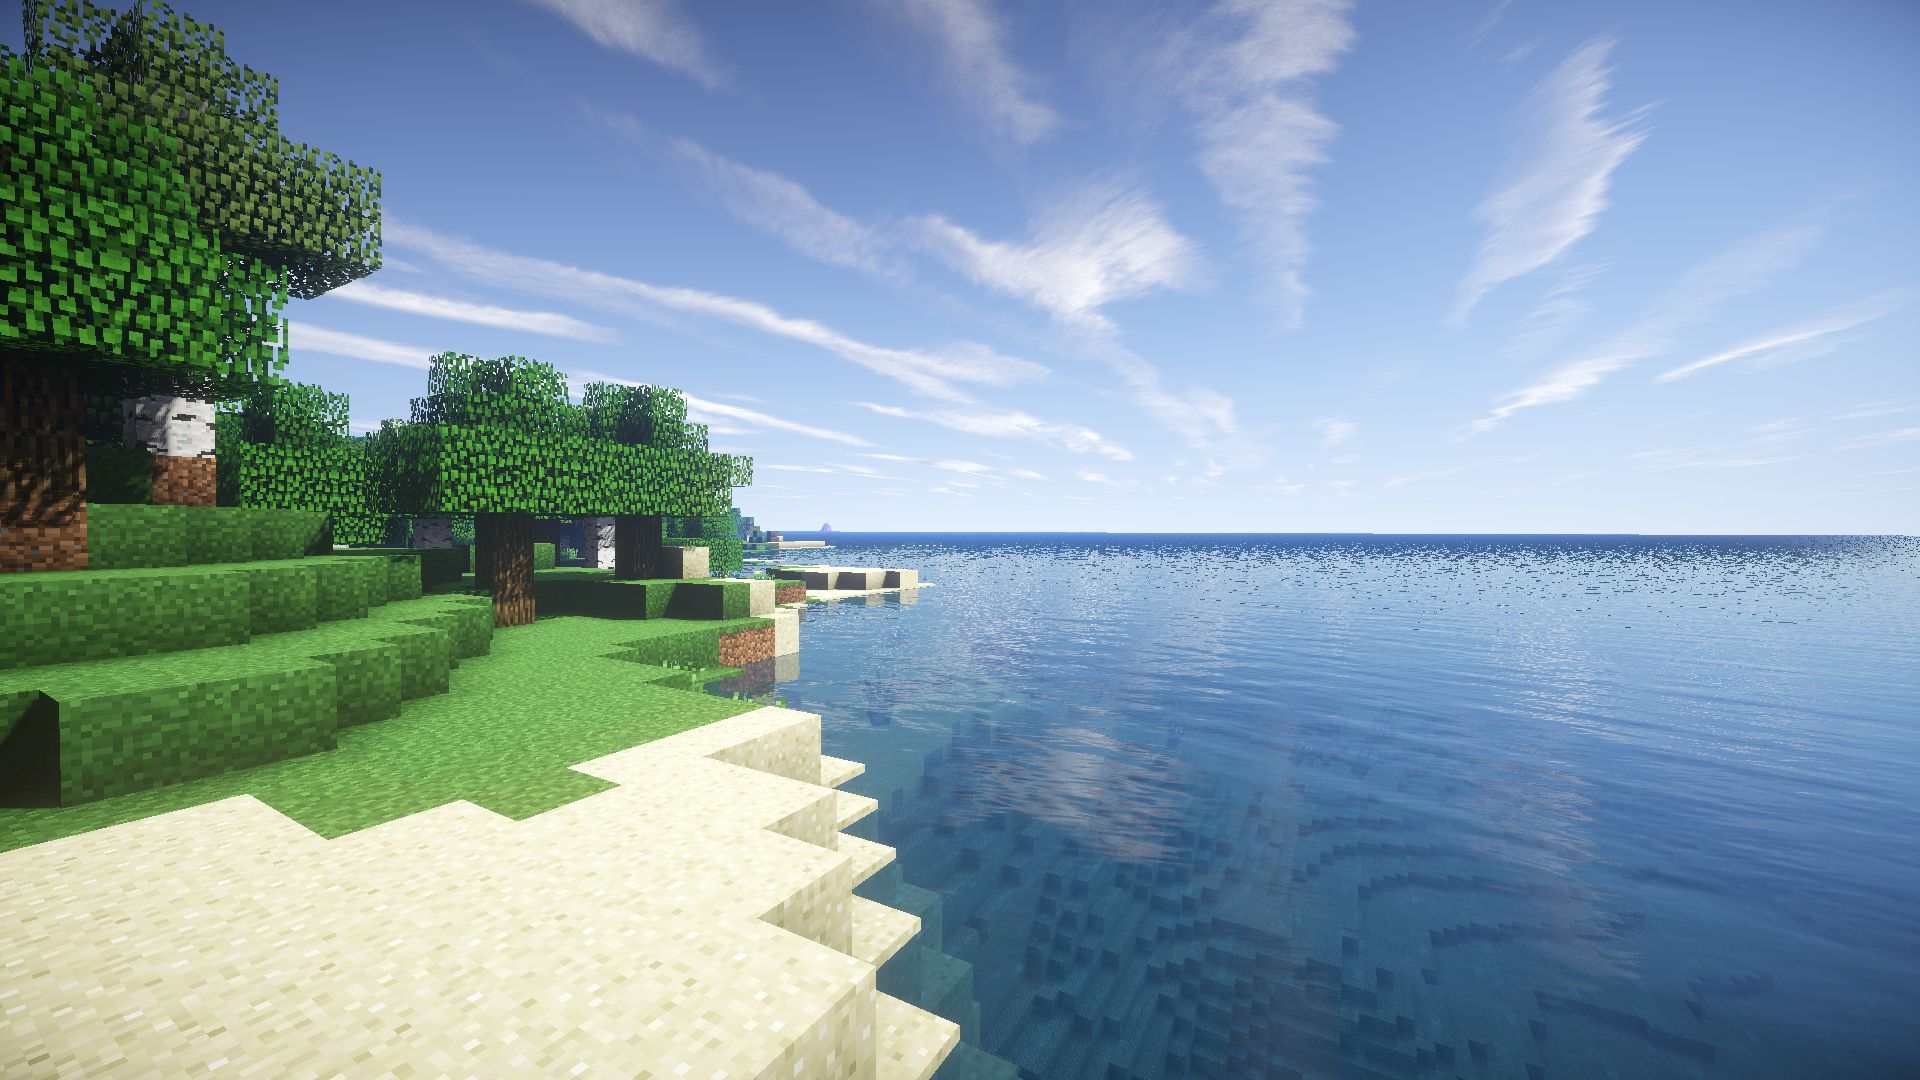 A minecraft scene with water and trees - Minecraft